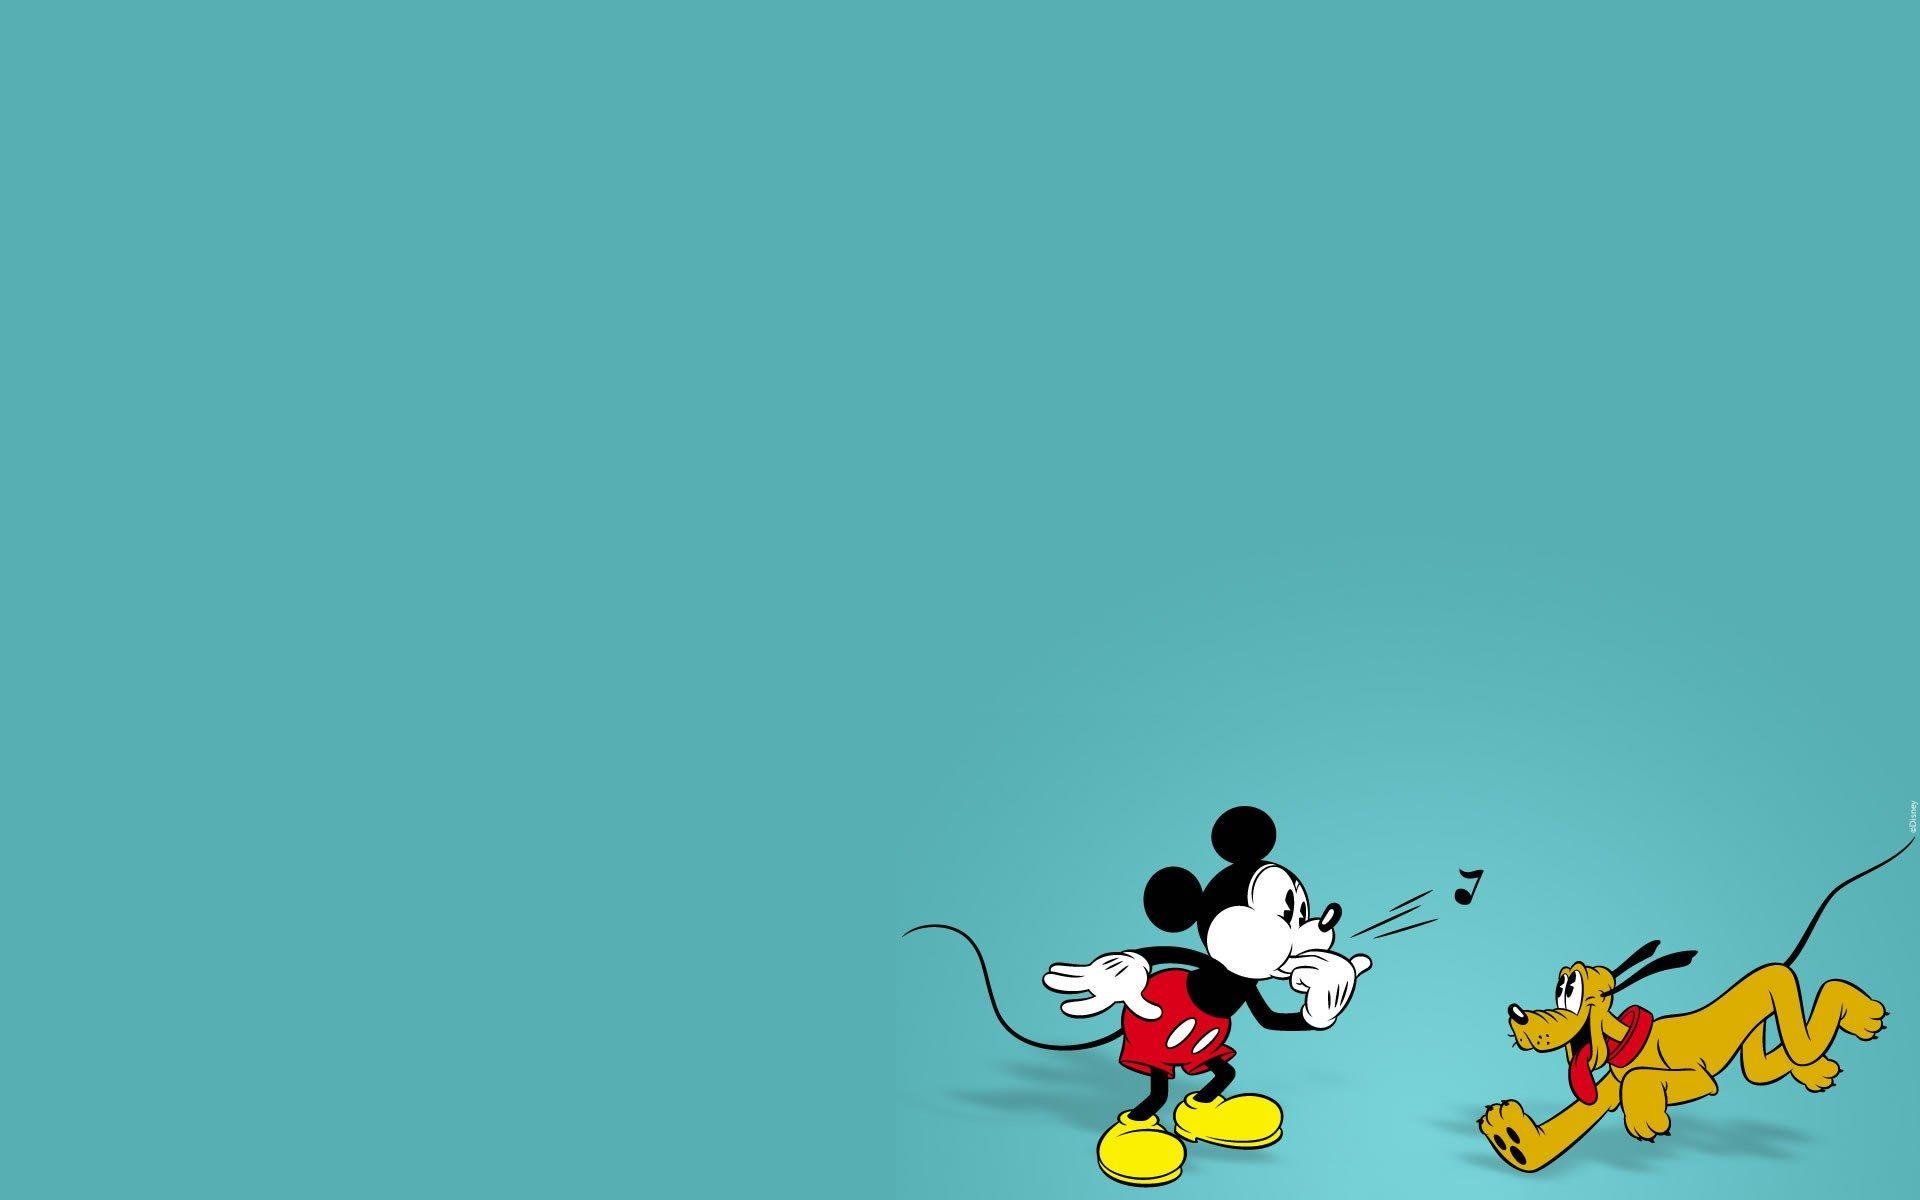 Mickey Mouse Backgrounds - Wallpaper Cave